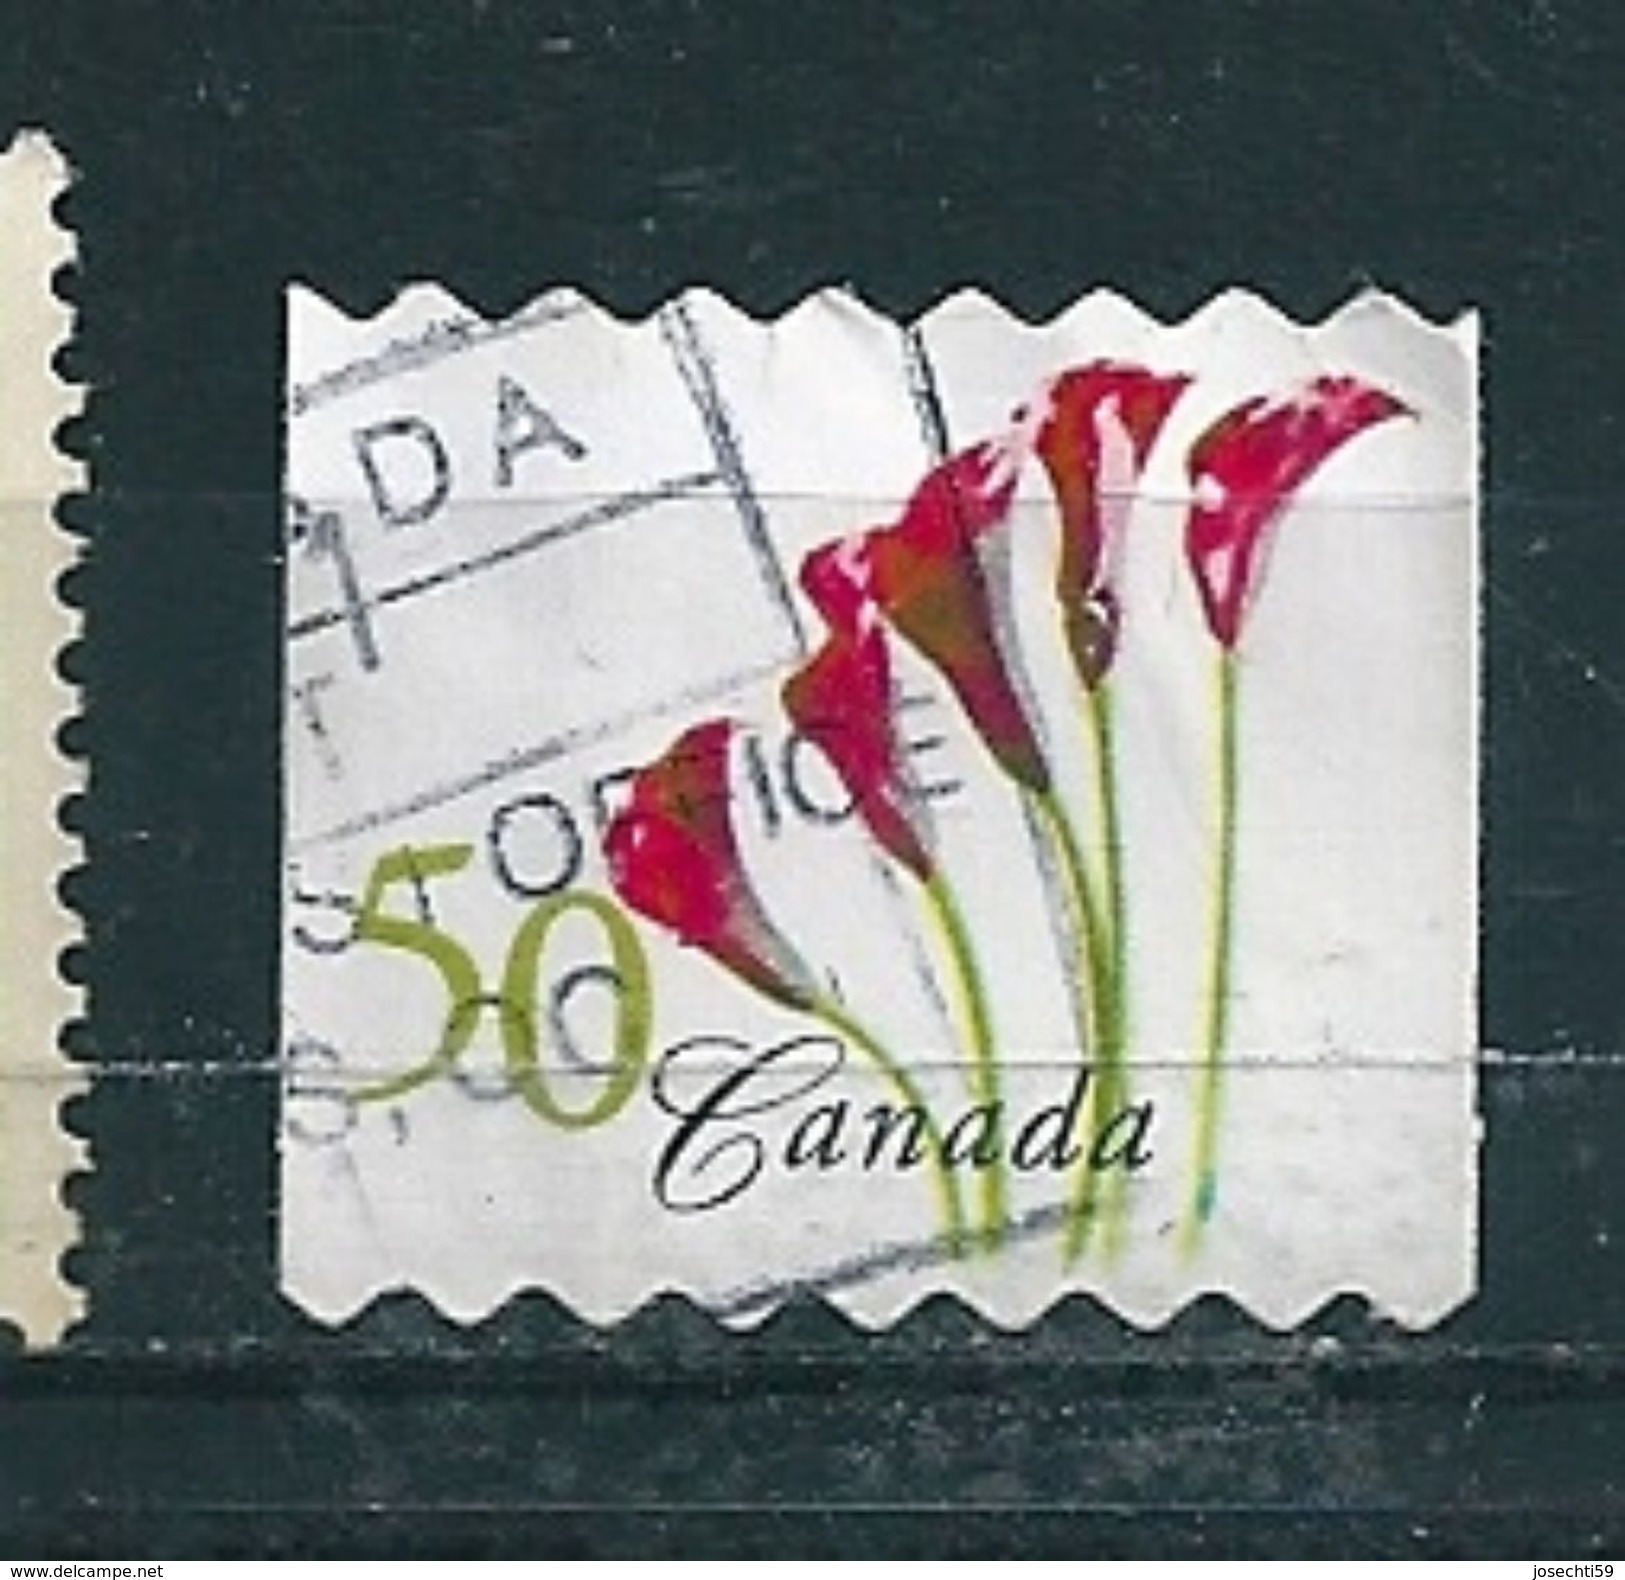 N°  2115 Lis Calla Arum D'Ethiopie Roulette TIMBRE STAMP Canada (2004) Oblitéré - Used Stamps